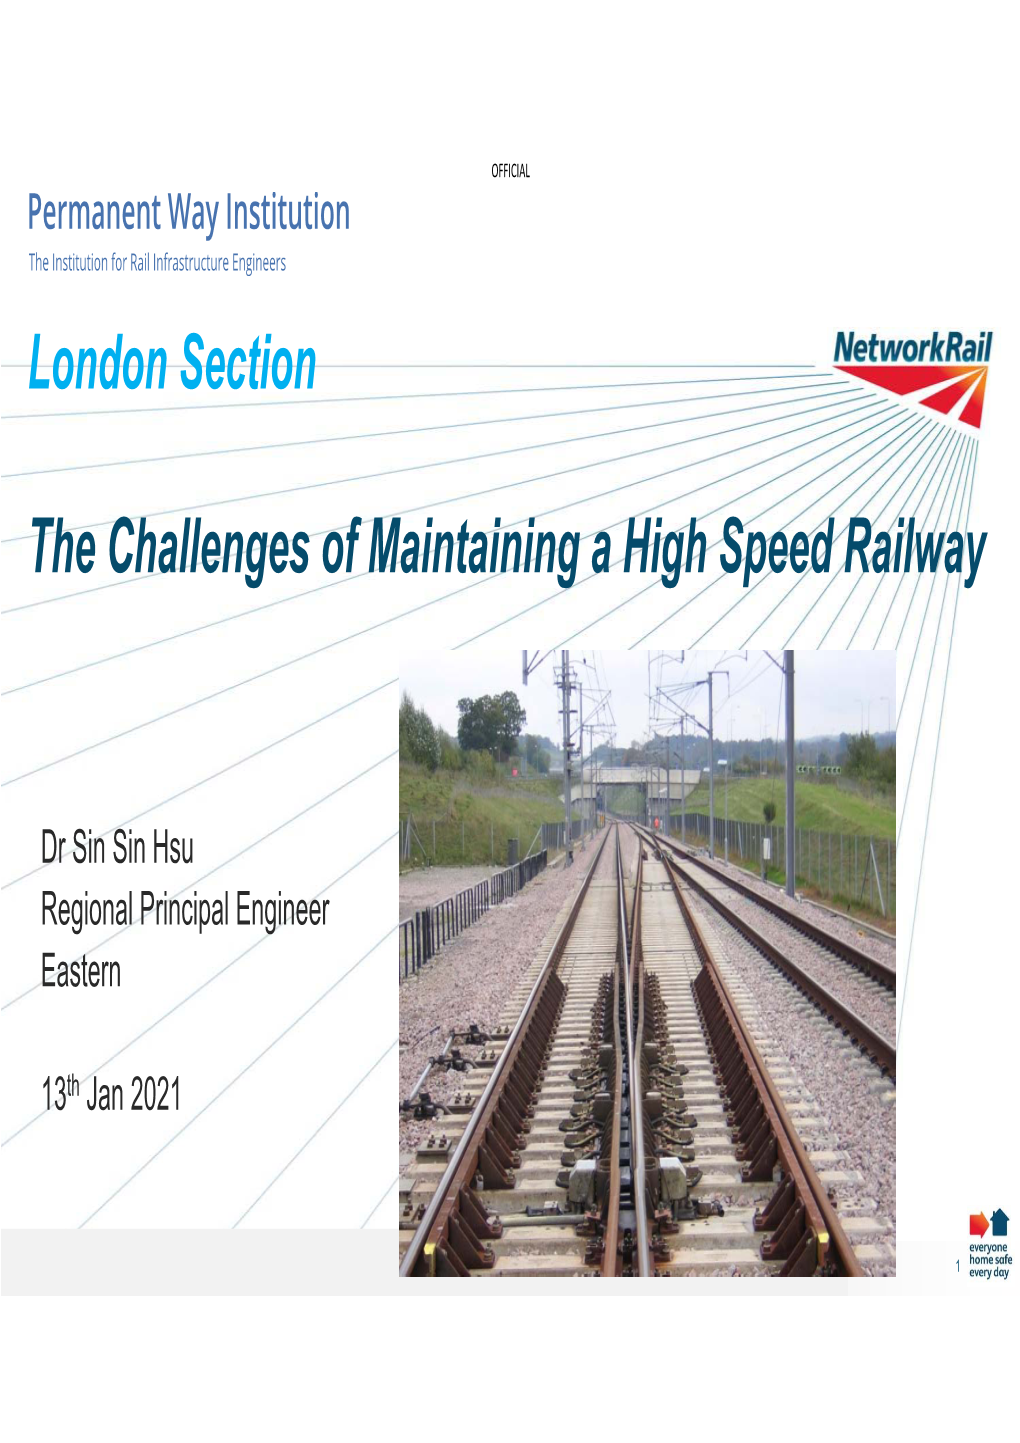 London Section the Challenges of Maintaining a High Speed Railway